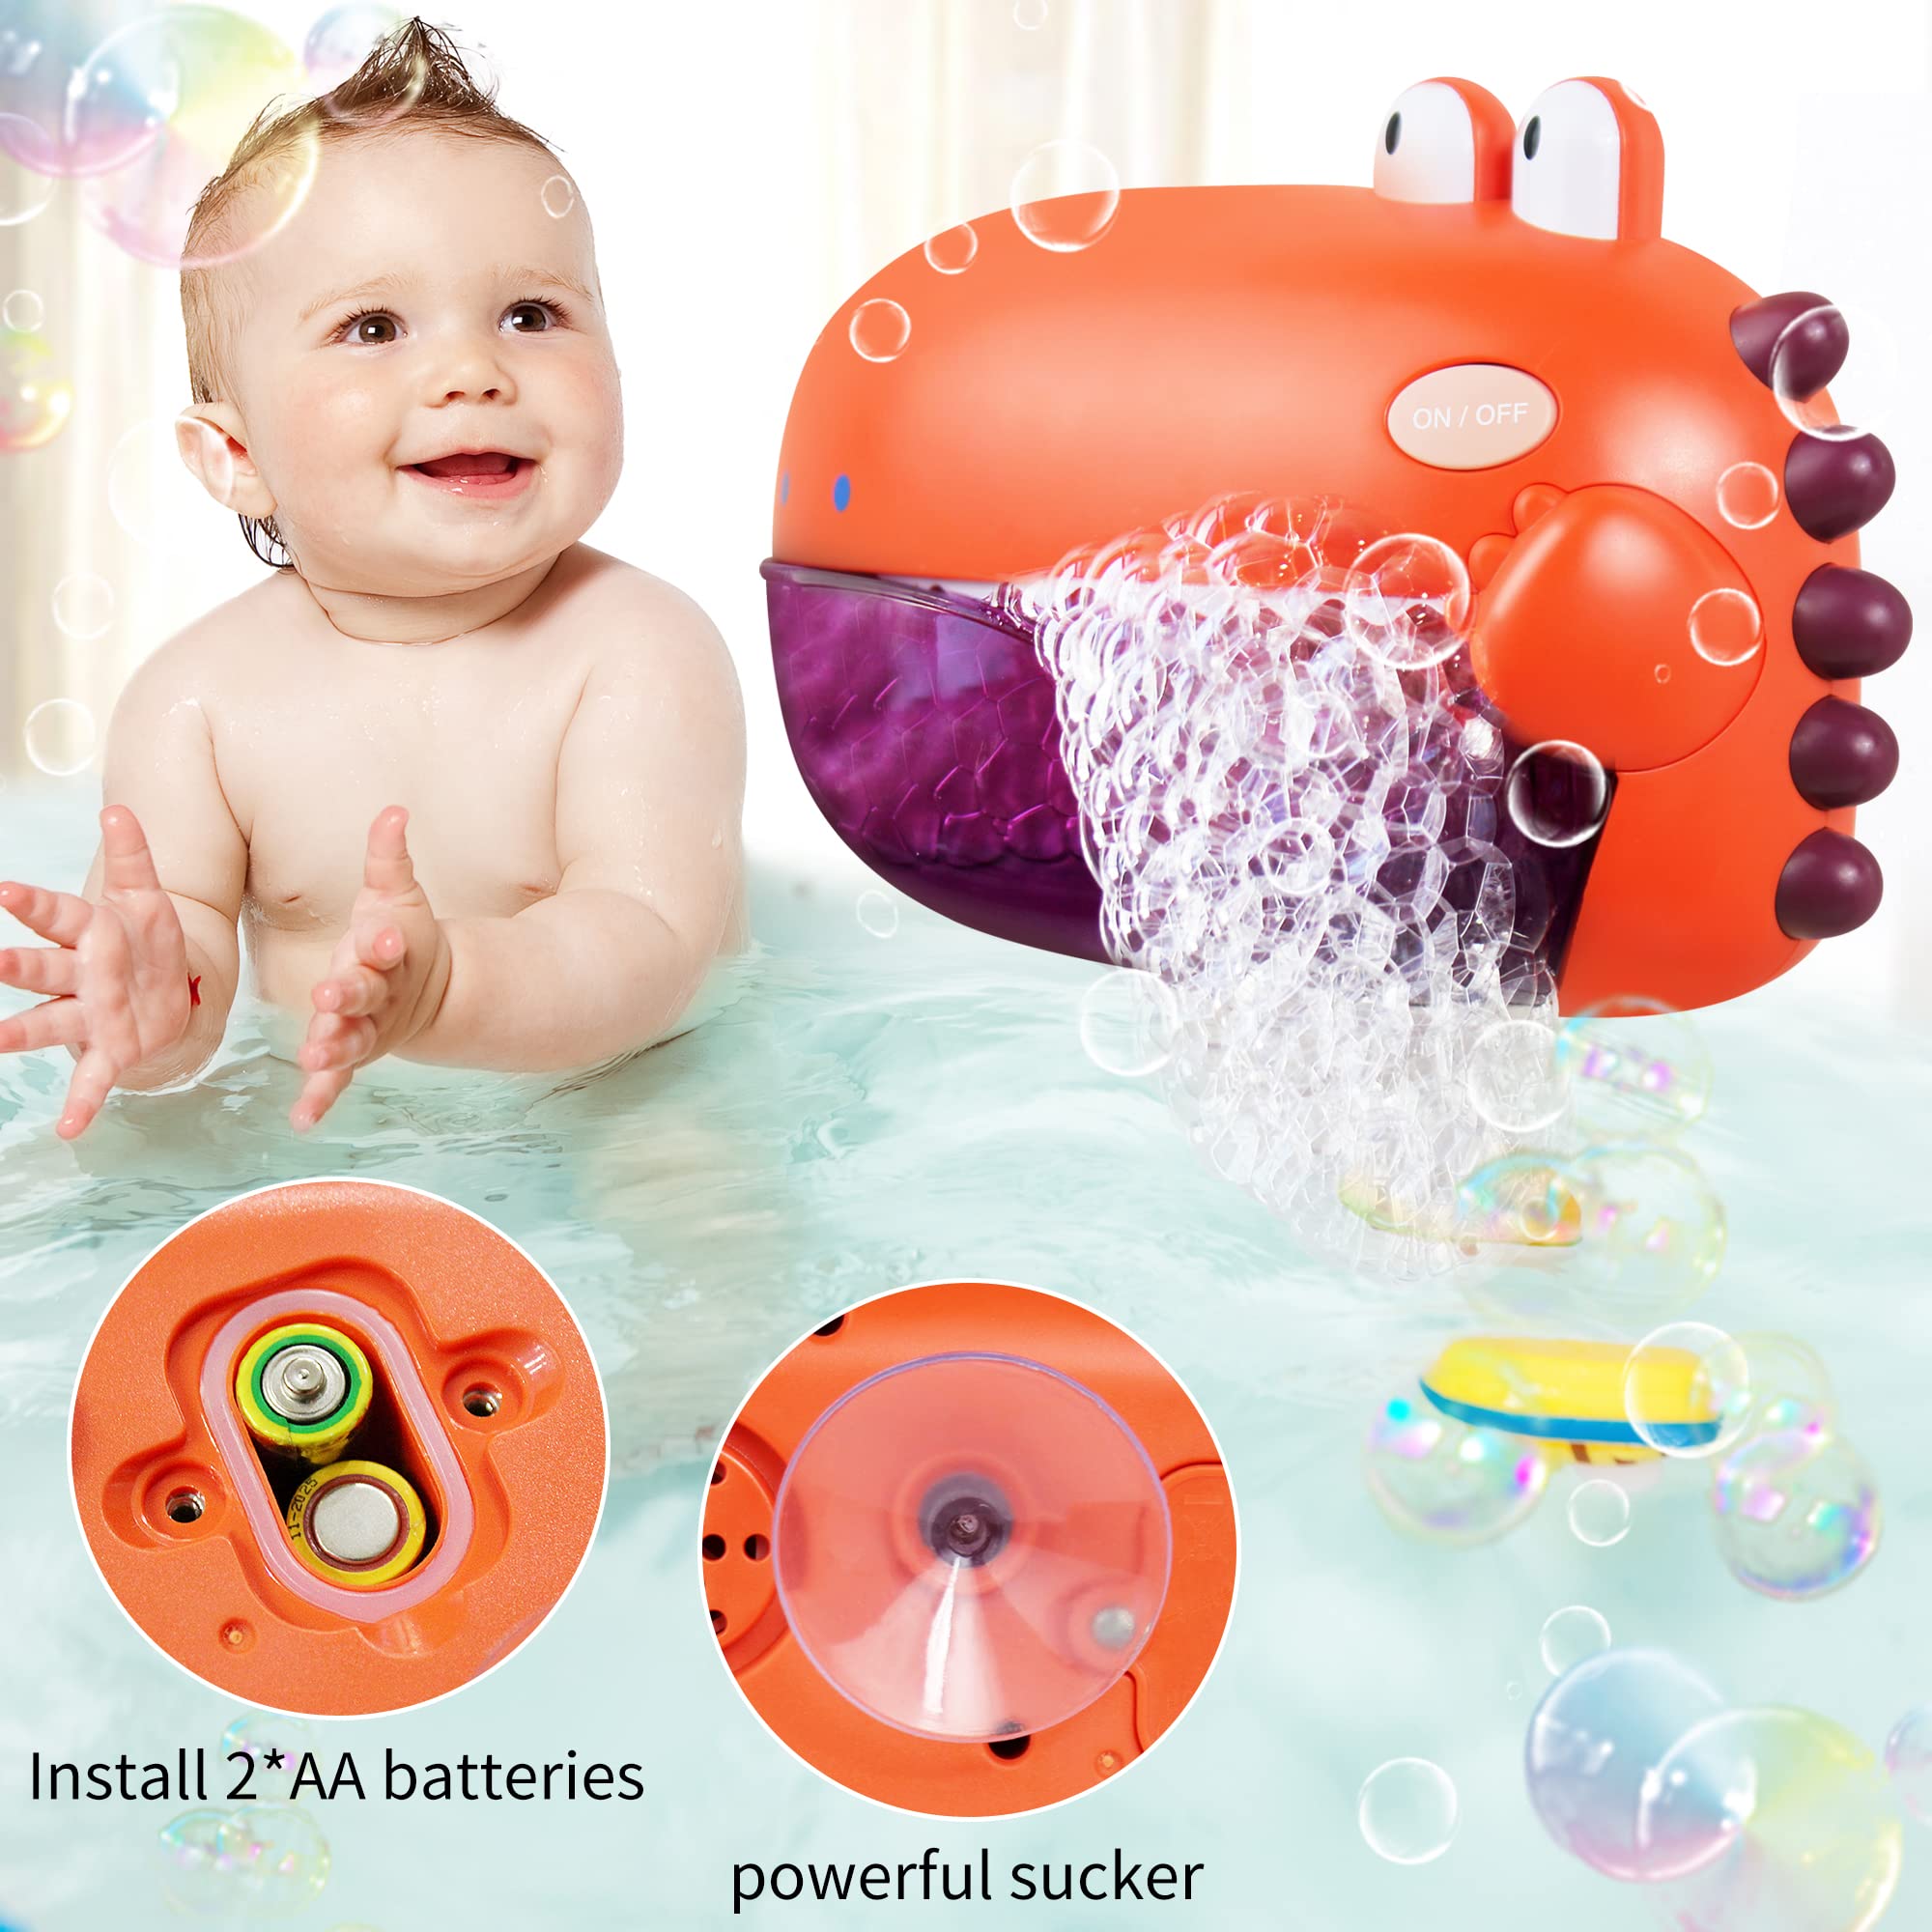 Grechi Dinosaur Bath Toys,Baby Bath Toys for The Baby Bathtub,Toddler Bath Toys Automatic Bubble Machine,Plays 12 Children’s Songs,Bath Toy Makes Great Gifts for Toddlers Age 18m+ Girl Boy